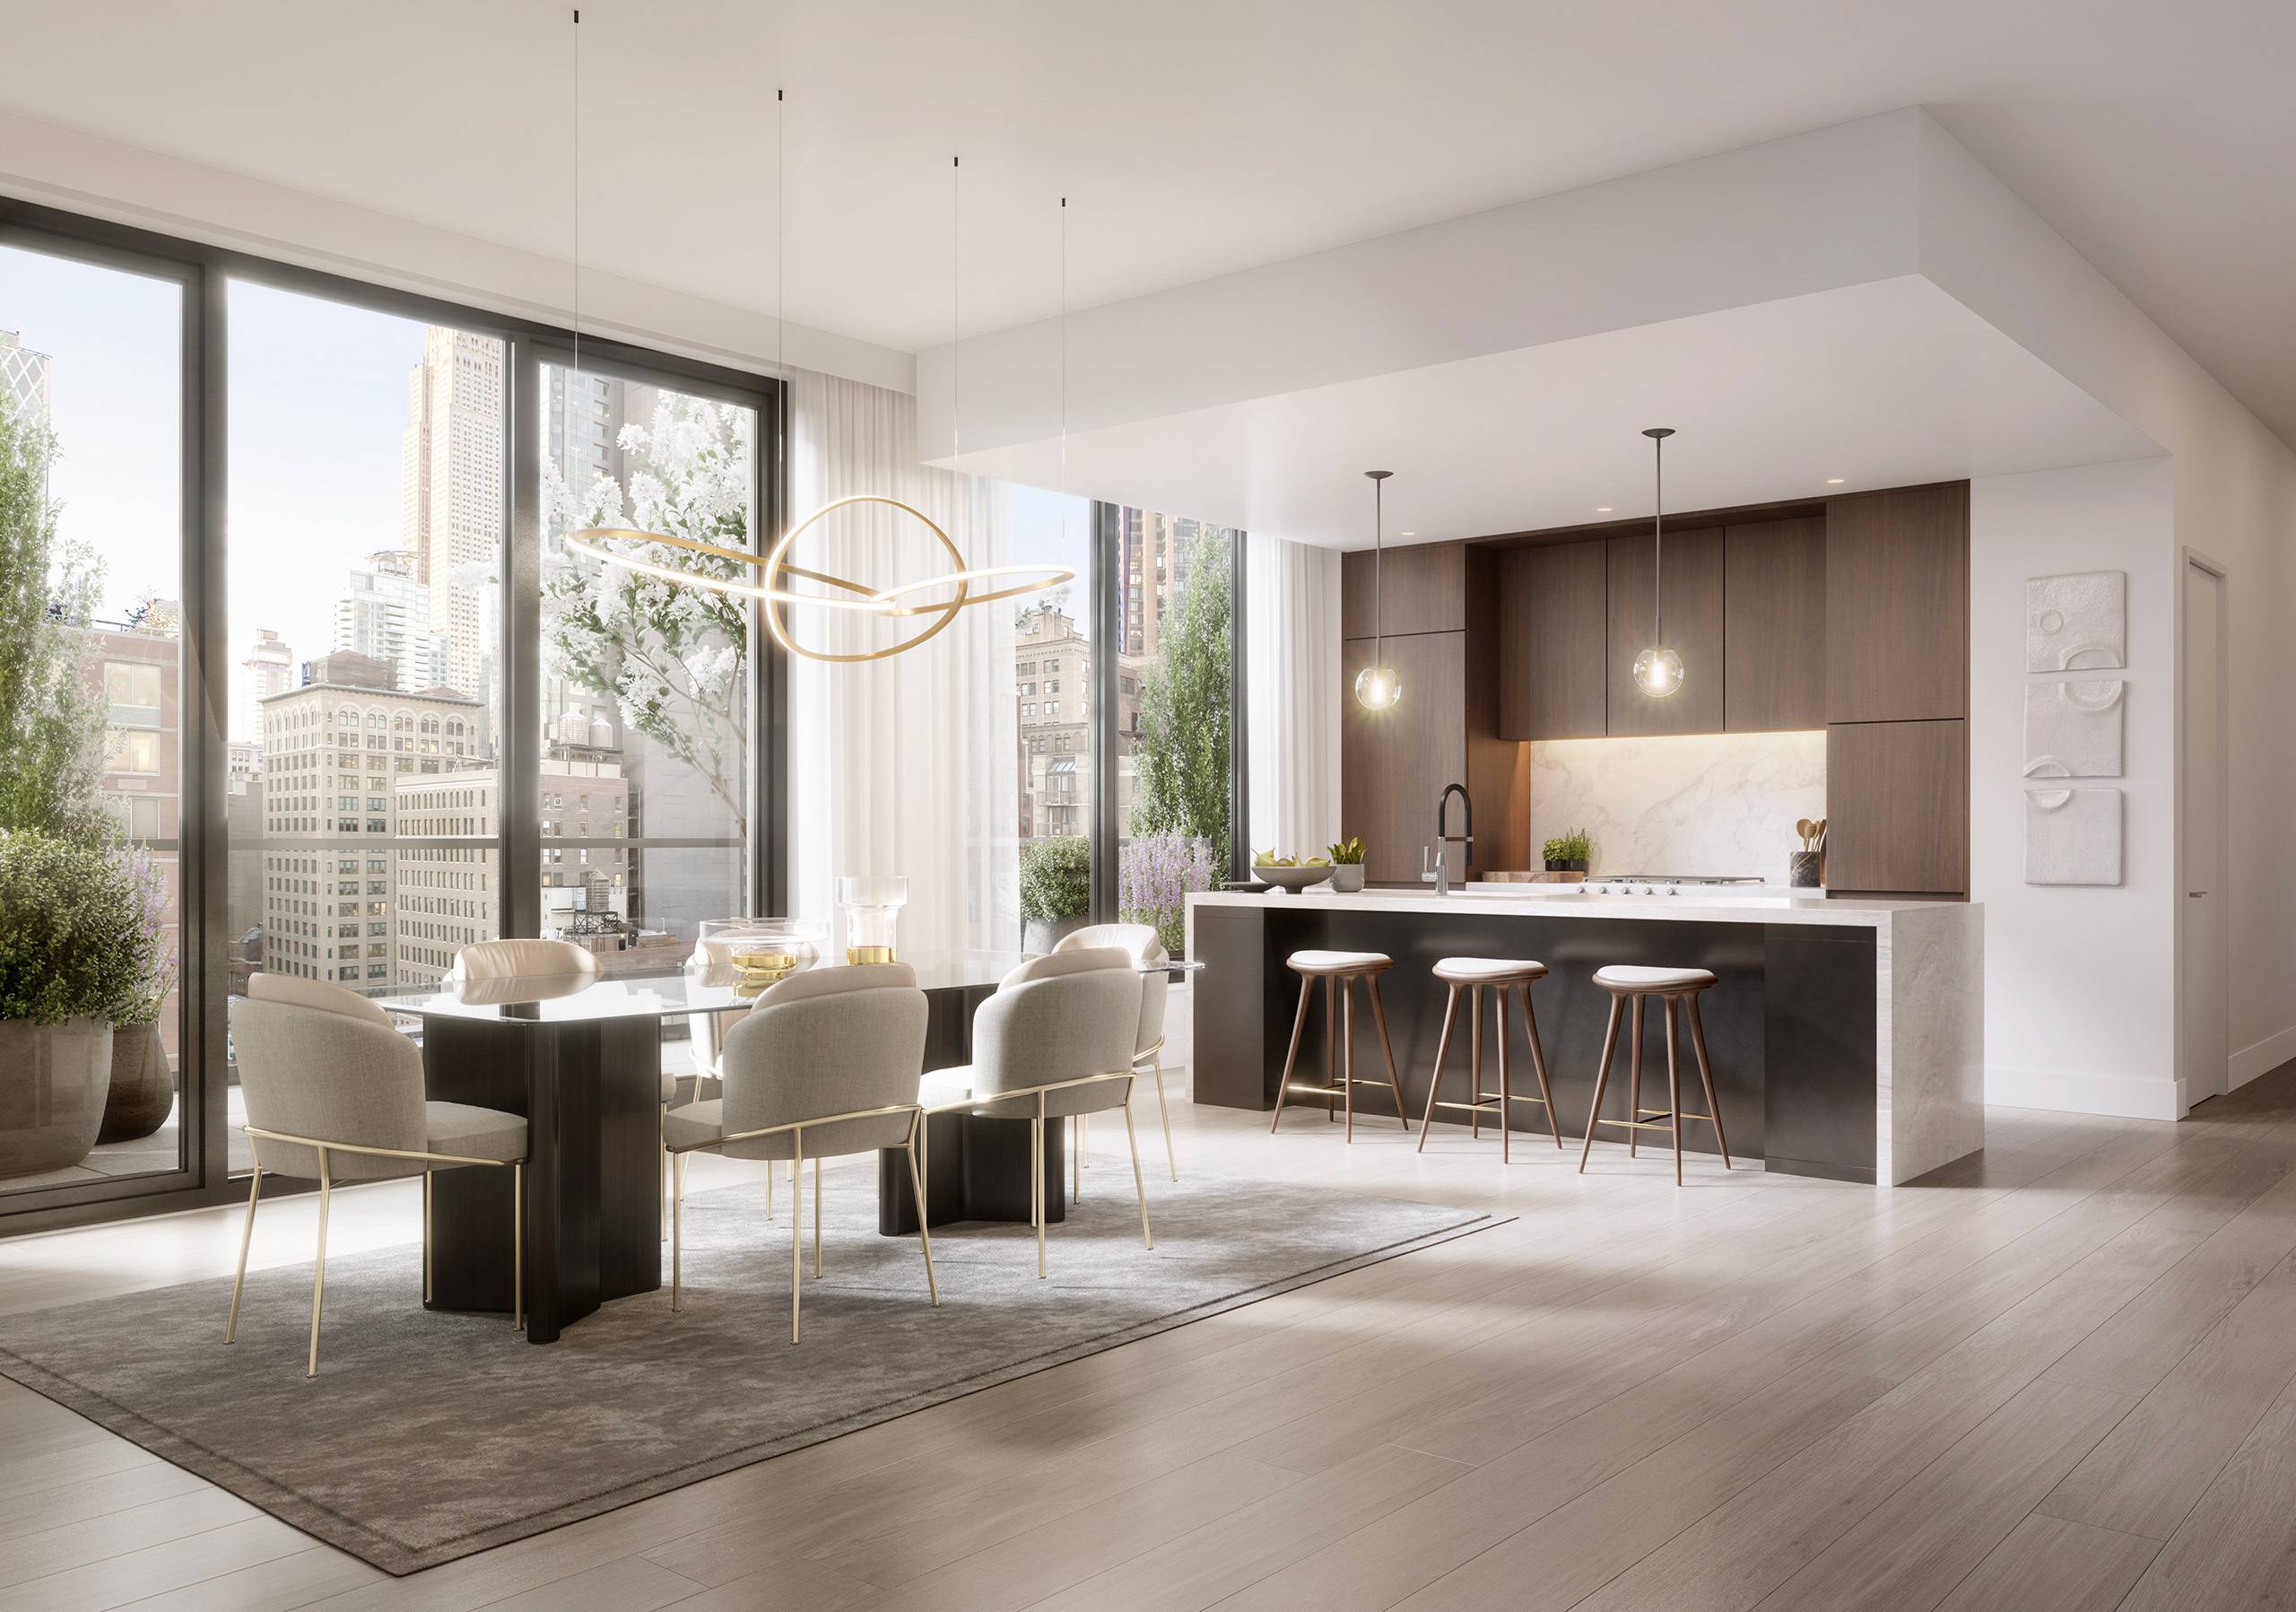 IMMEDIATE OCCUPANCY A brand new Kips Bay condo with a private rooftop terrace and an abundance of natural light, this inviting 2 bedroom, 2 bathroom home is an effortless blend ...